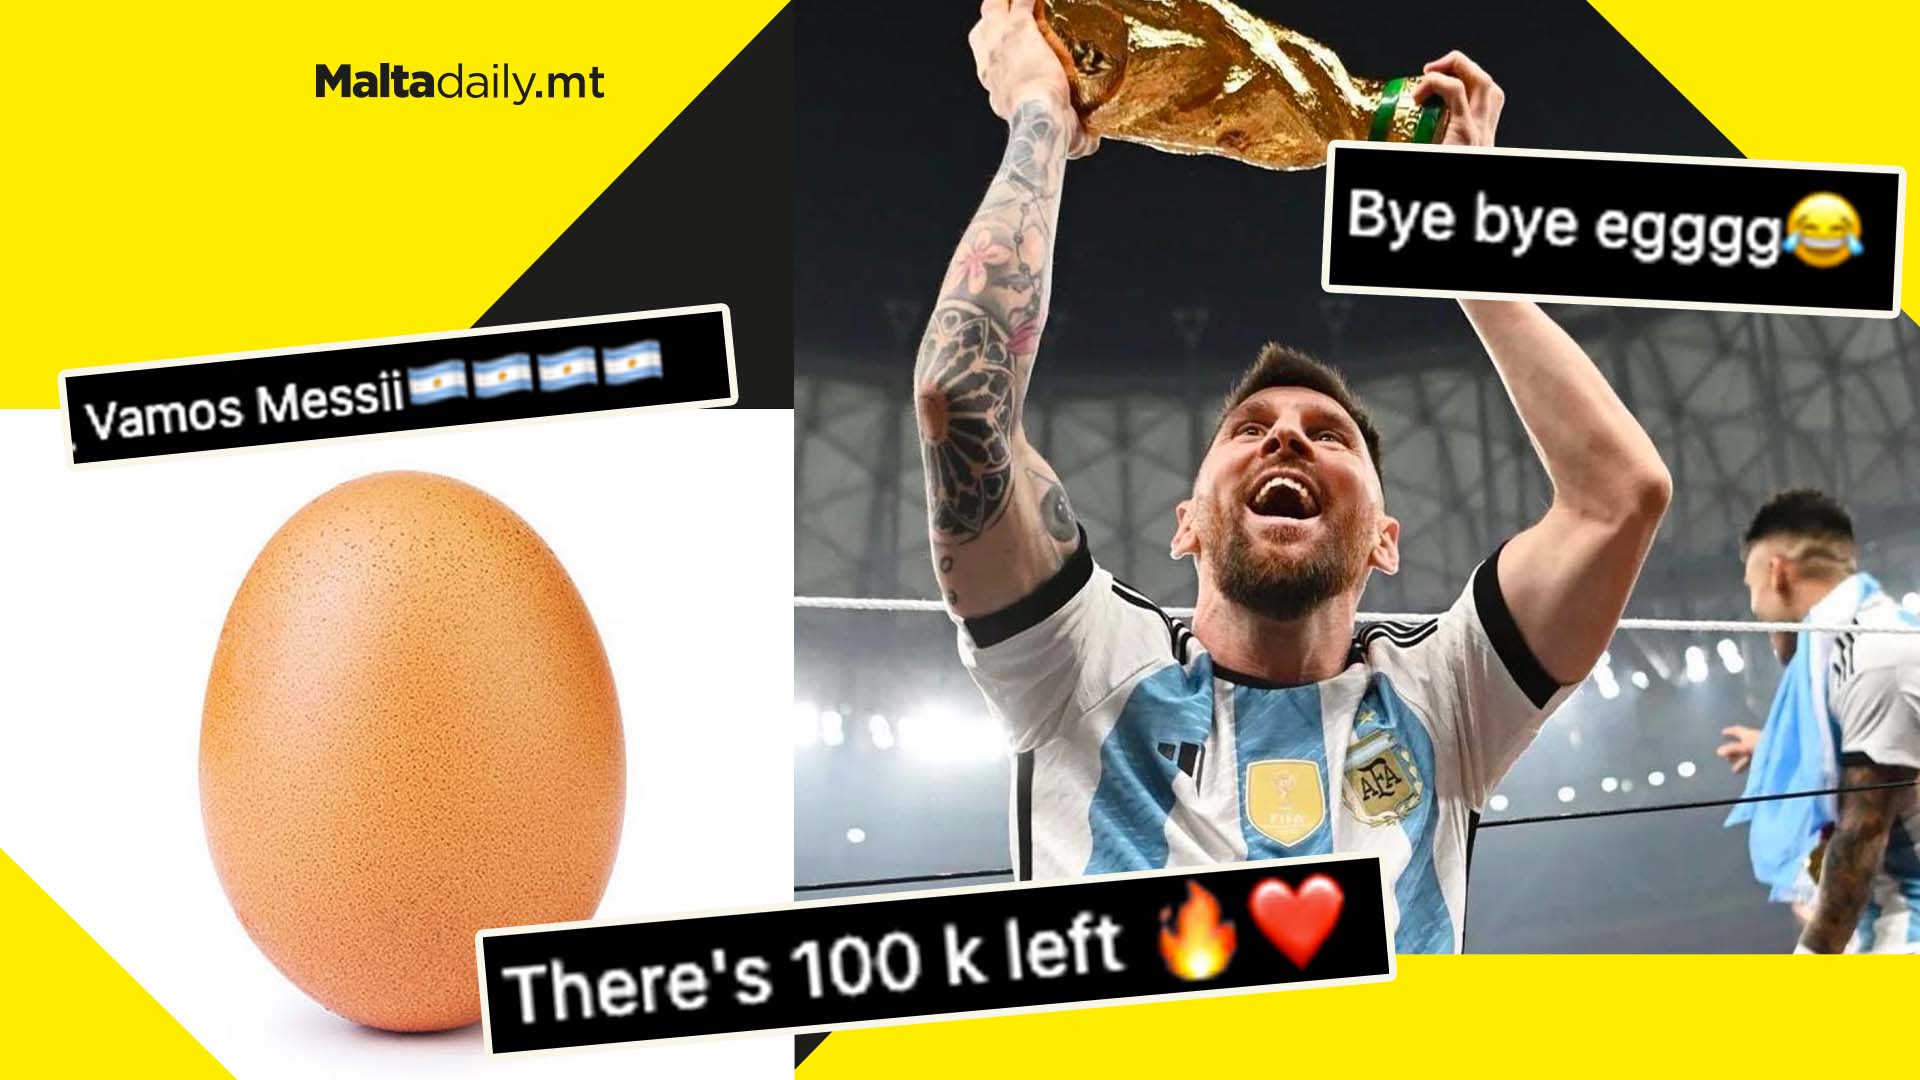 Can Messi overturn the egg? 80K likes to become most liked post